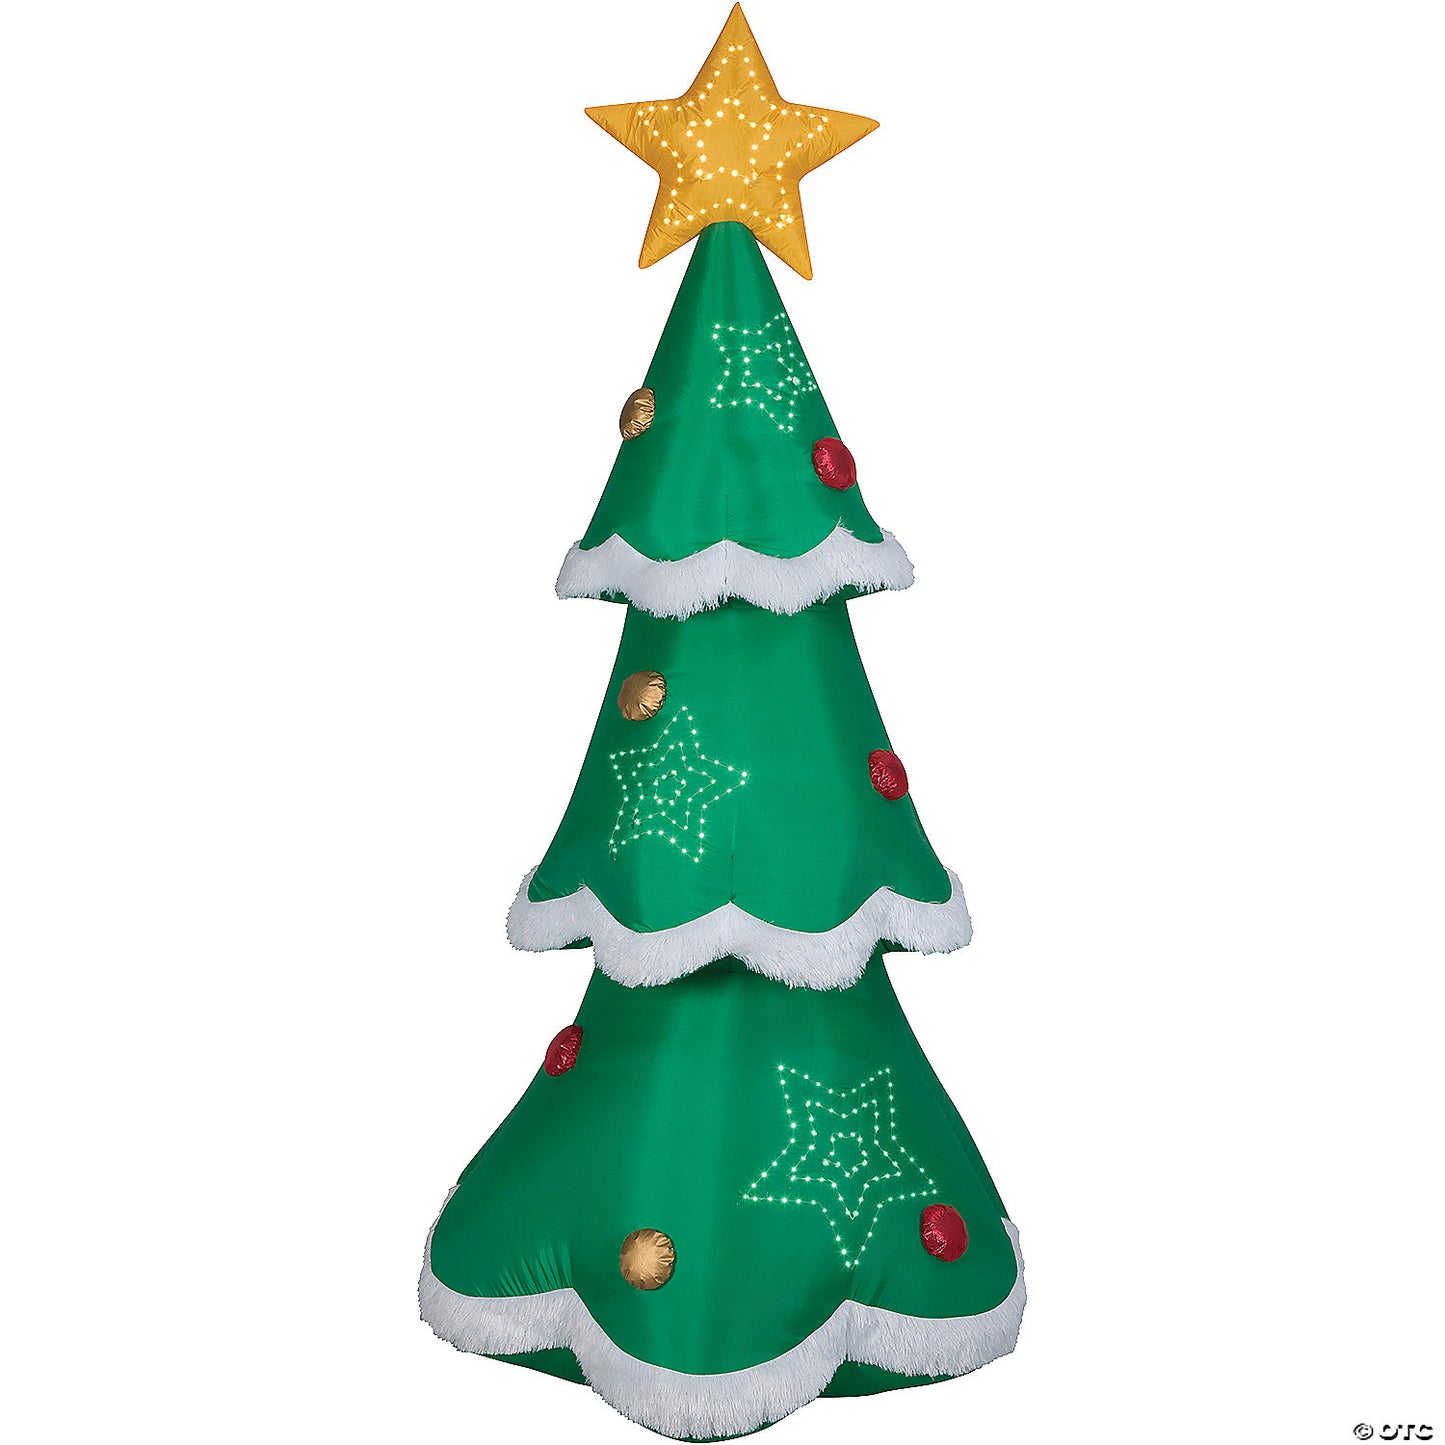 7.5 ft. Blow-Up Inflatable Mixed Media Christmas Tree with Built-In LED Lights Outdoor Yard Decoration